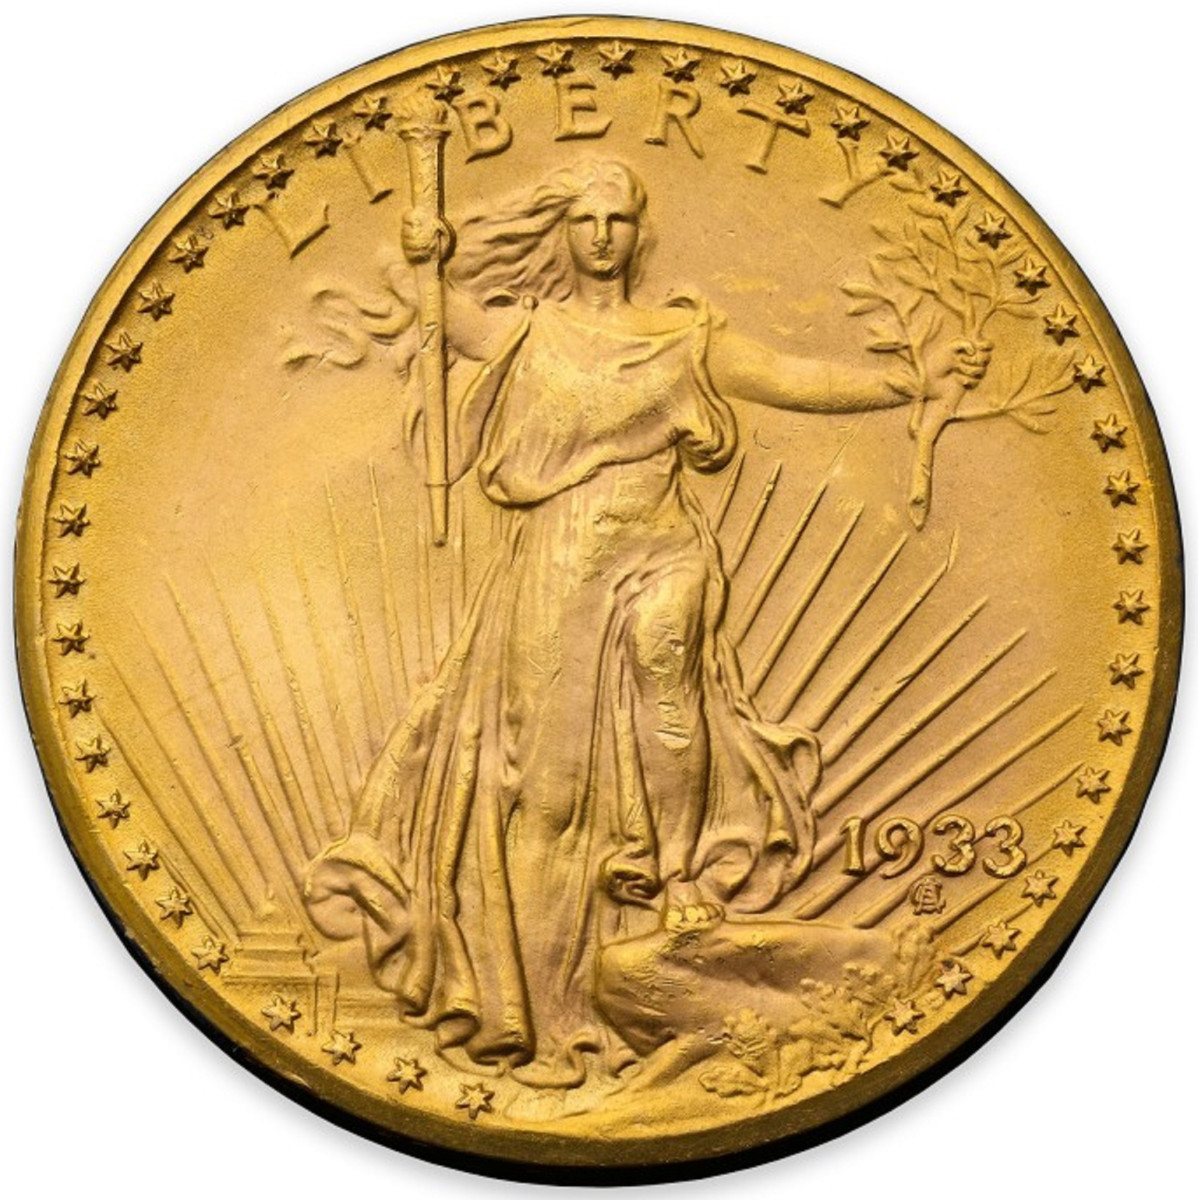 This U.S. 1933 double eagle gold coin sold for a record $18.9 million in 2021. (Image courtesy Sotheby's.)